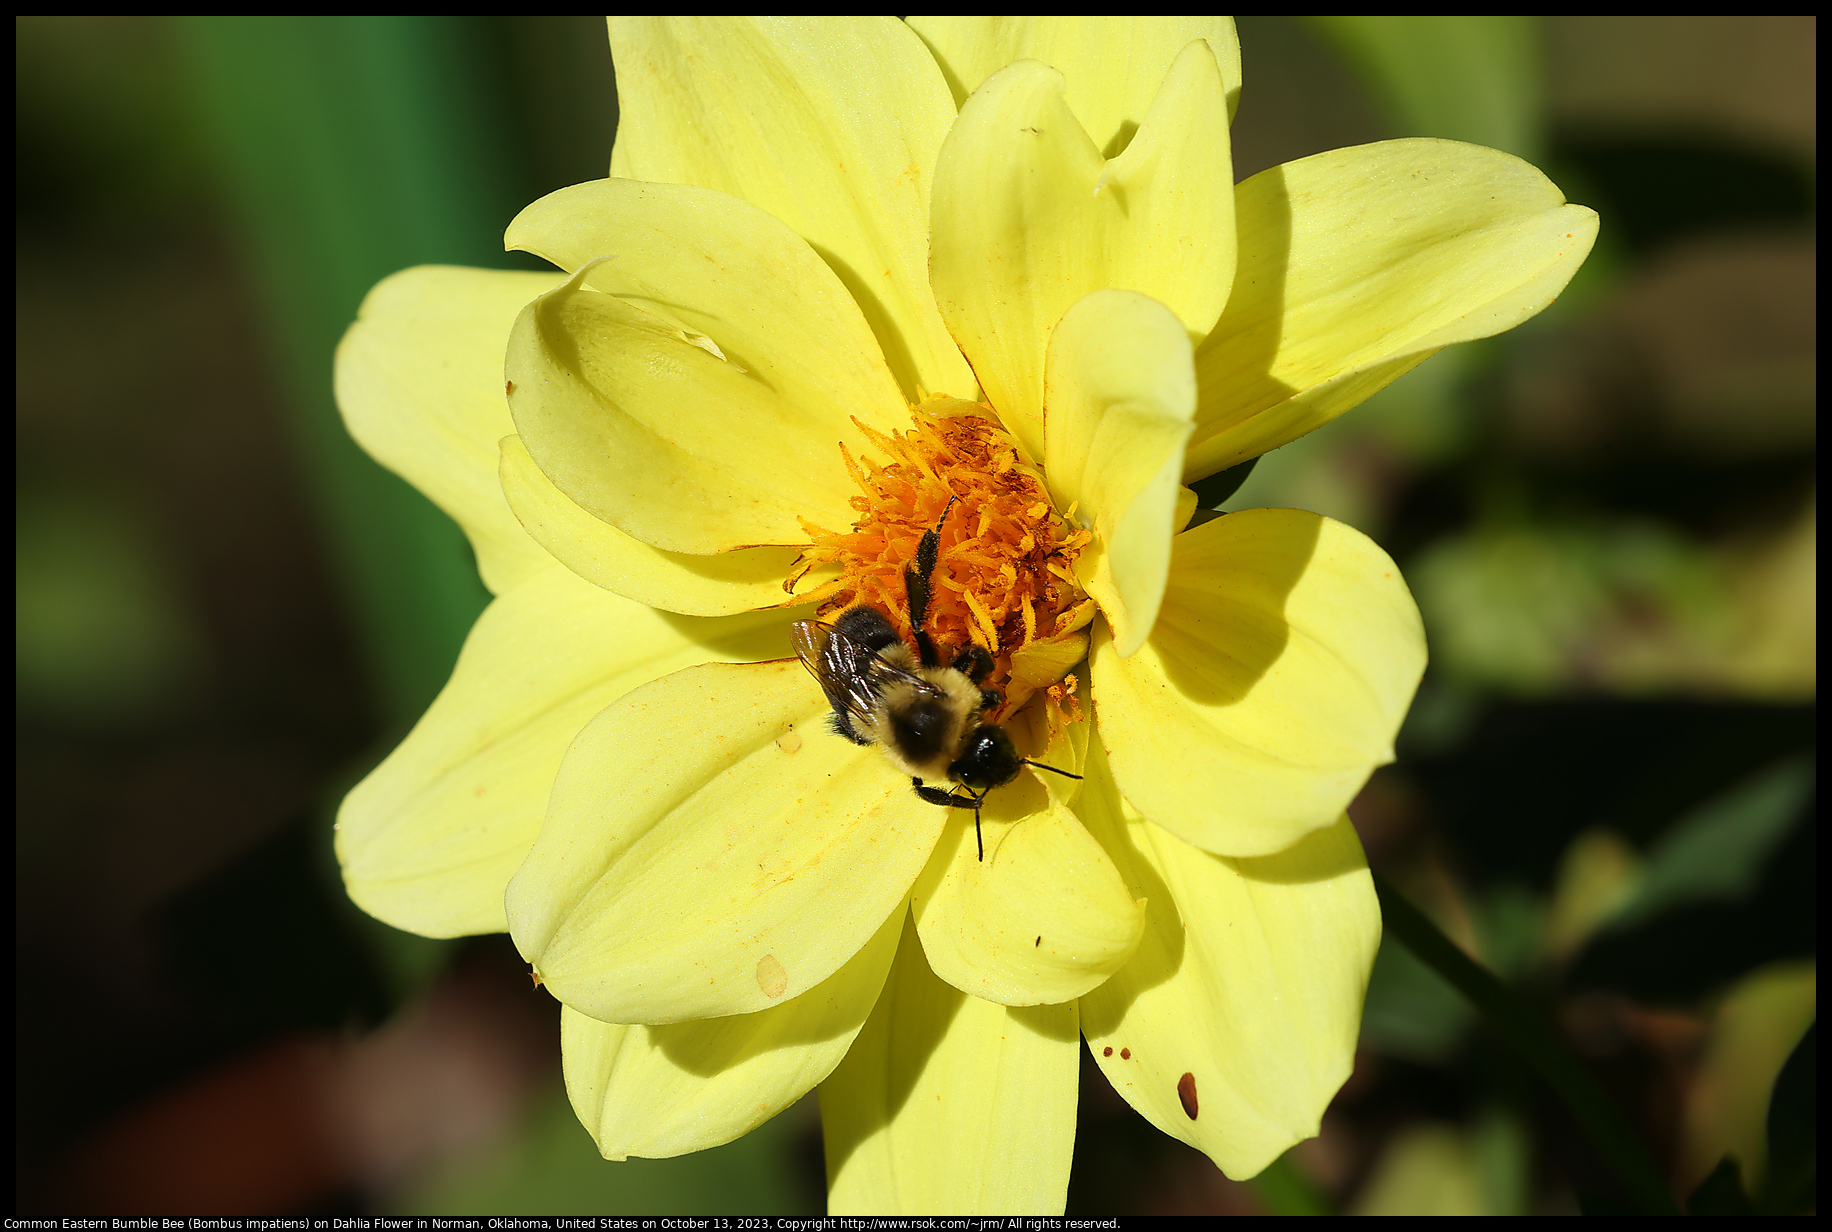 Common Eastern Bumble Bee (Bombus impatiens) on Dahlia Flower in Norman, Oklahoma, United States on October 13, 2023